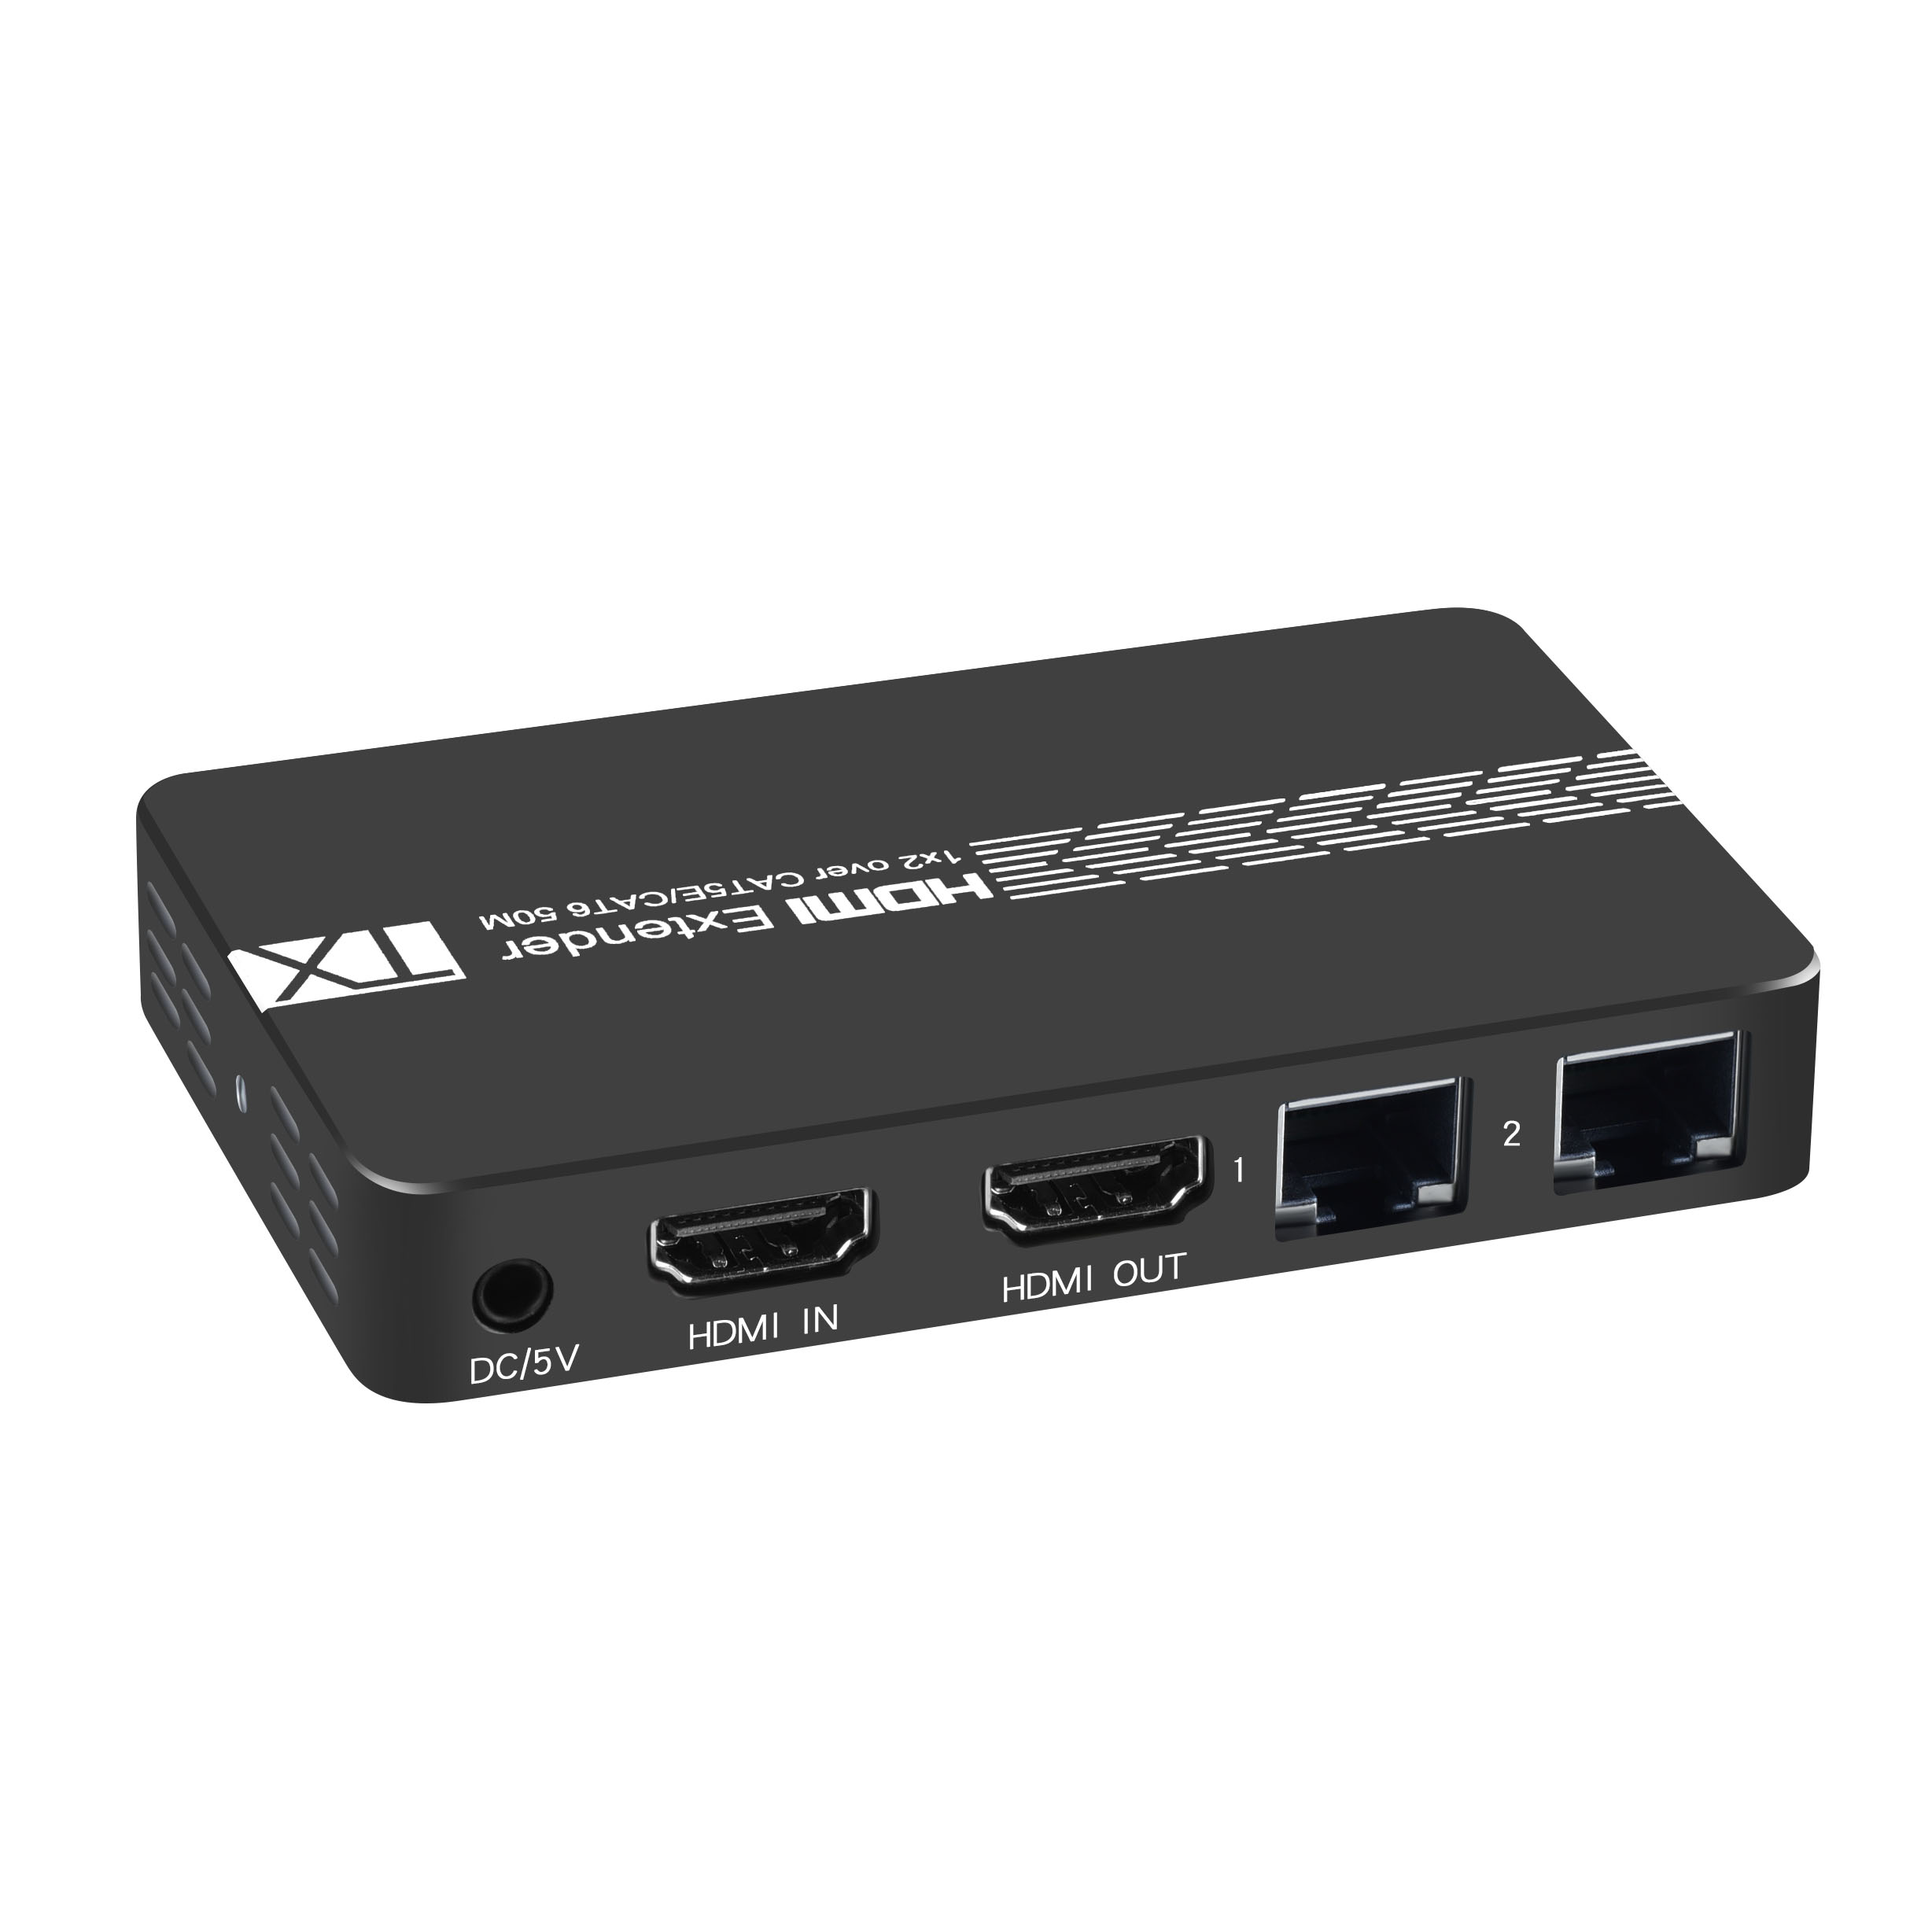 VK-E12 HDMI Splitter 1X2 Over Cat5e/cat6 50m with IR POC Loop out